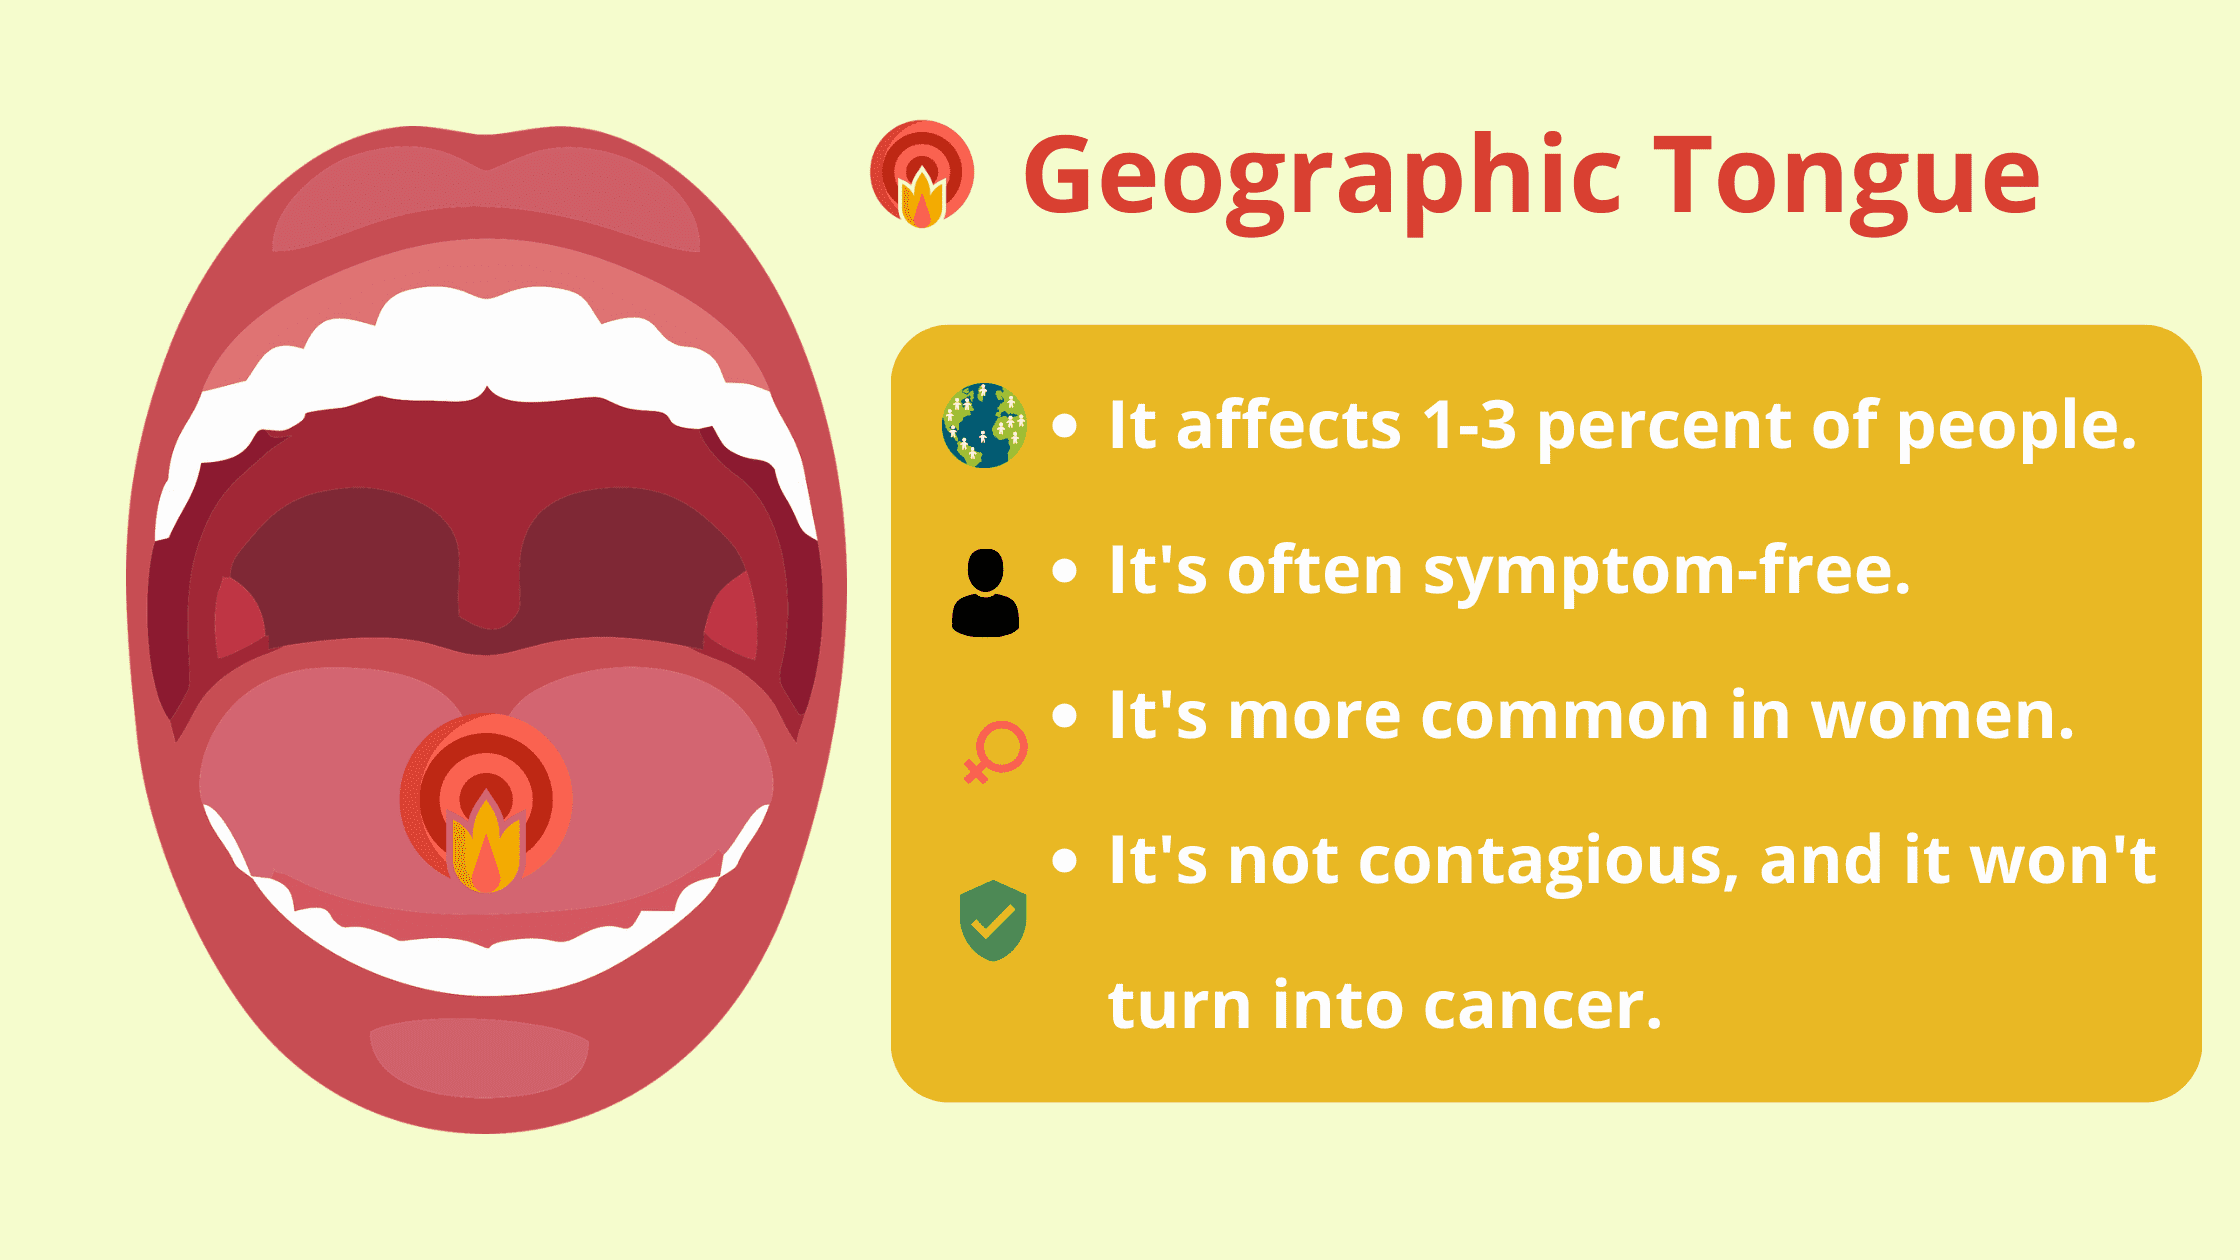 Geographic tongue facts